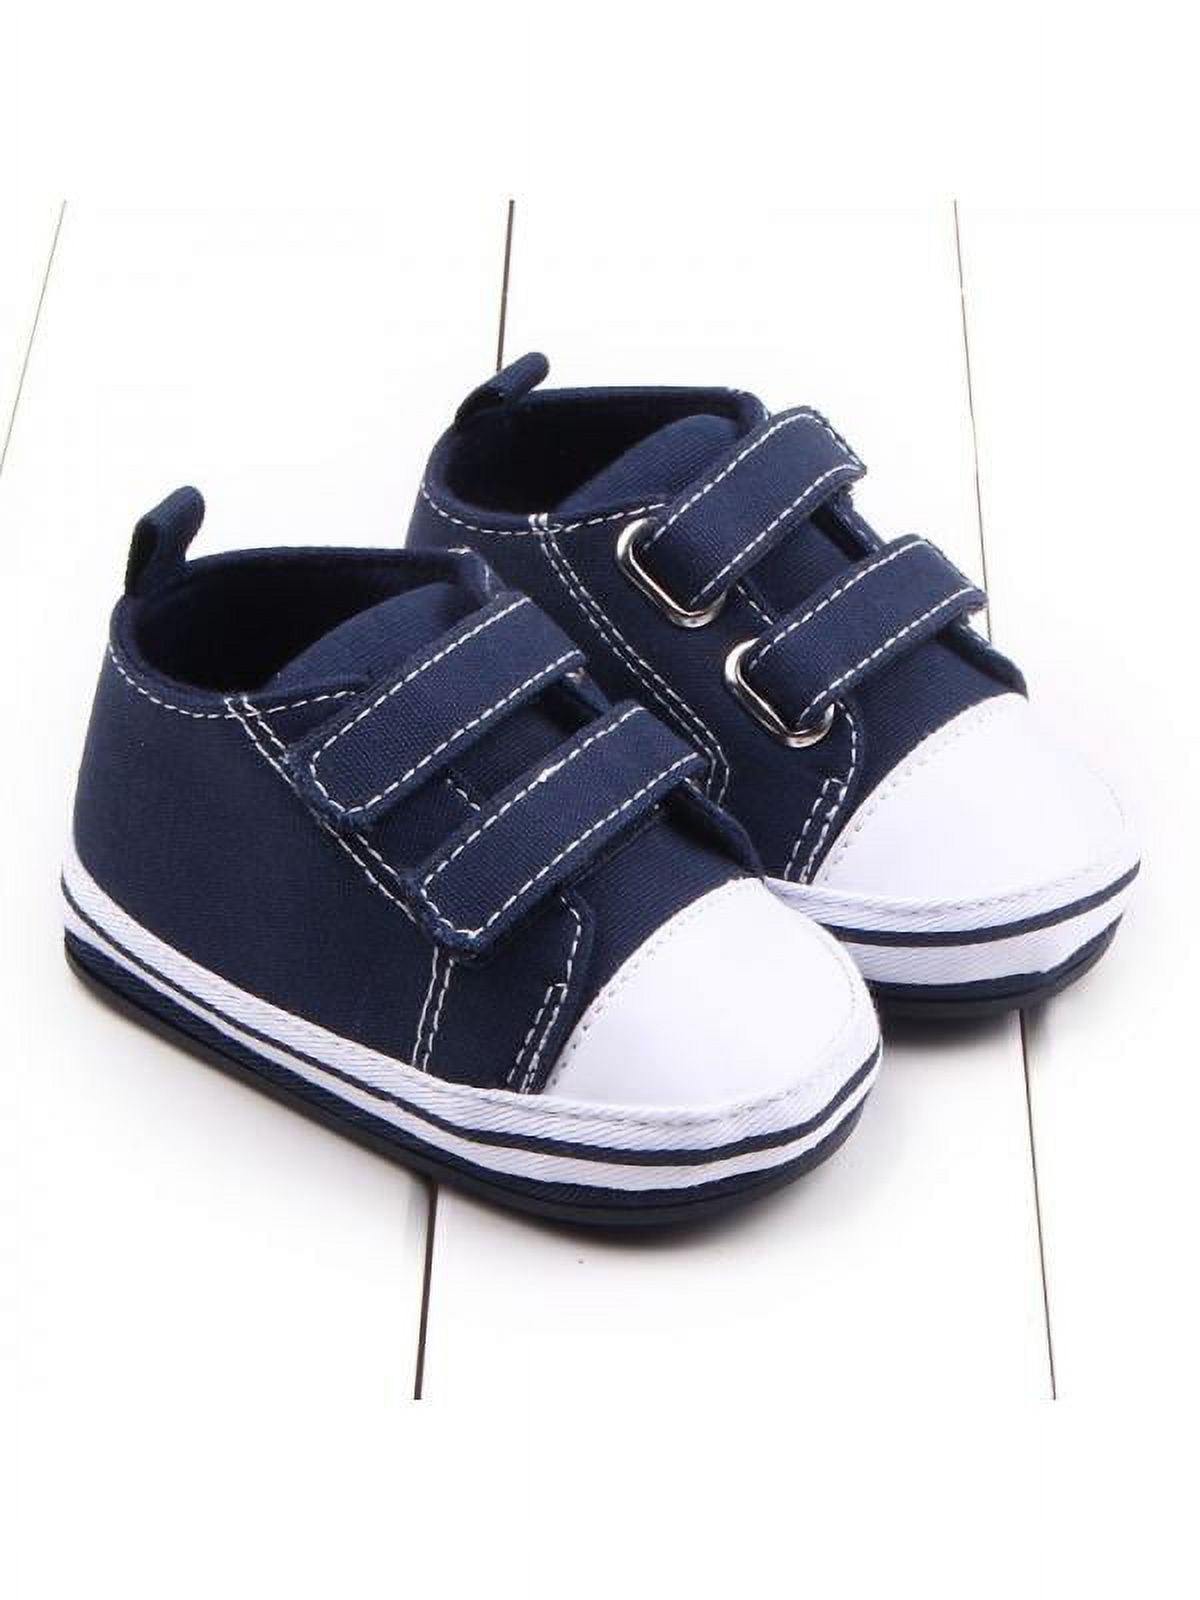 Infant Toddler Baby Boys Girls Soft Sole Crib Shoes Sneaker Newborn 0-27 Months - image 3 of 9